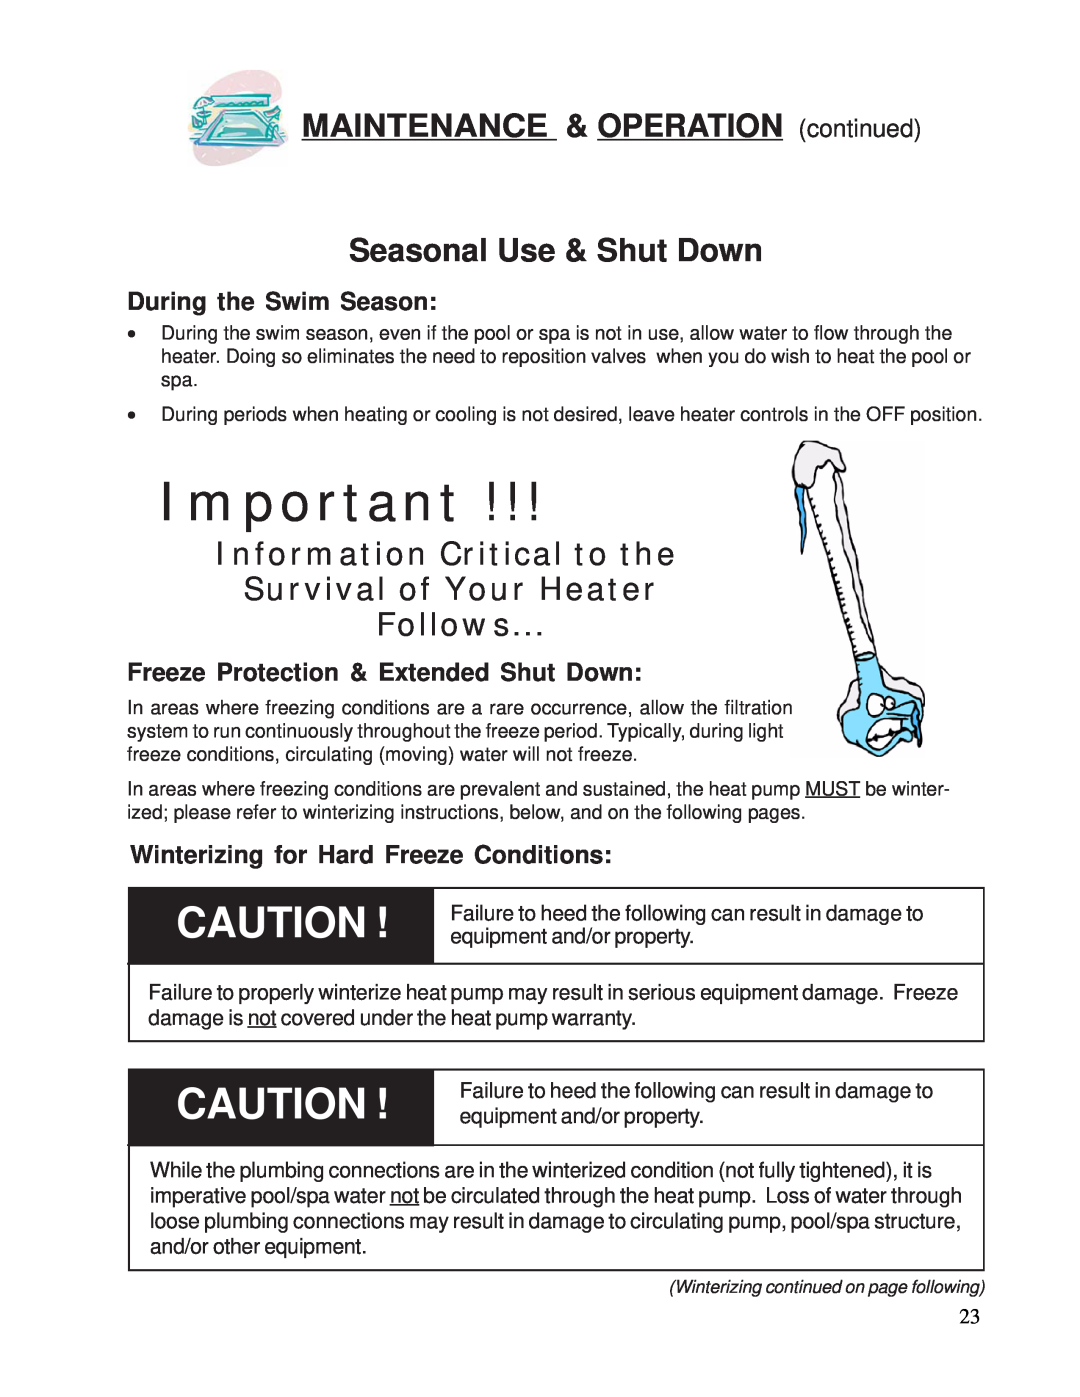 Aquacal 100 Seasonal Use & Shut Down, Information Critical to the, Survival of Your Heater Follows, During the Swim Season 